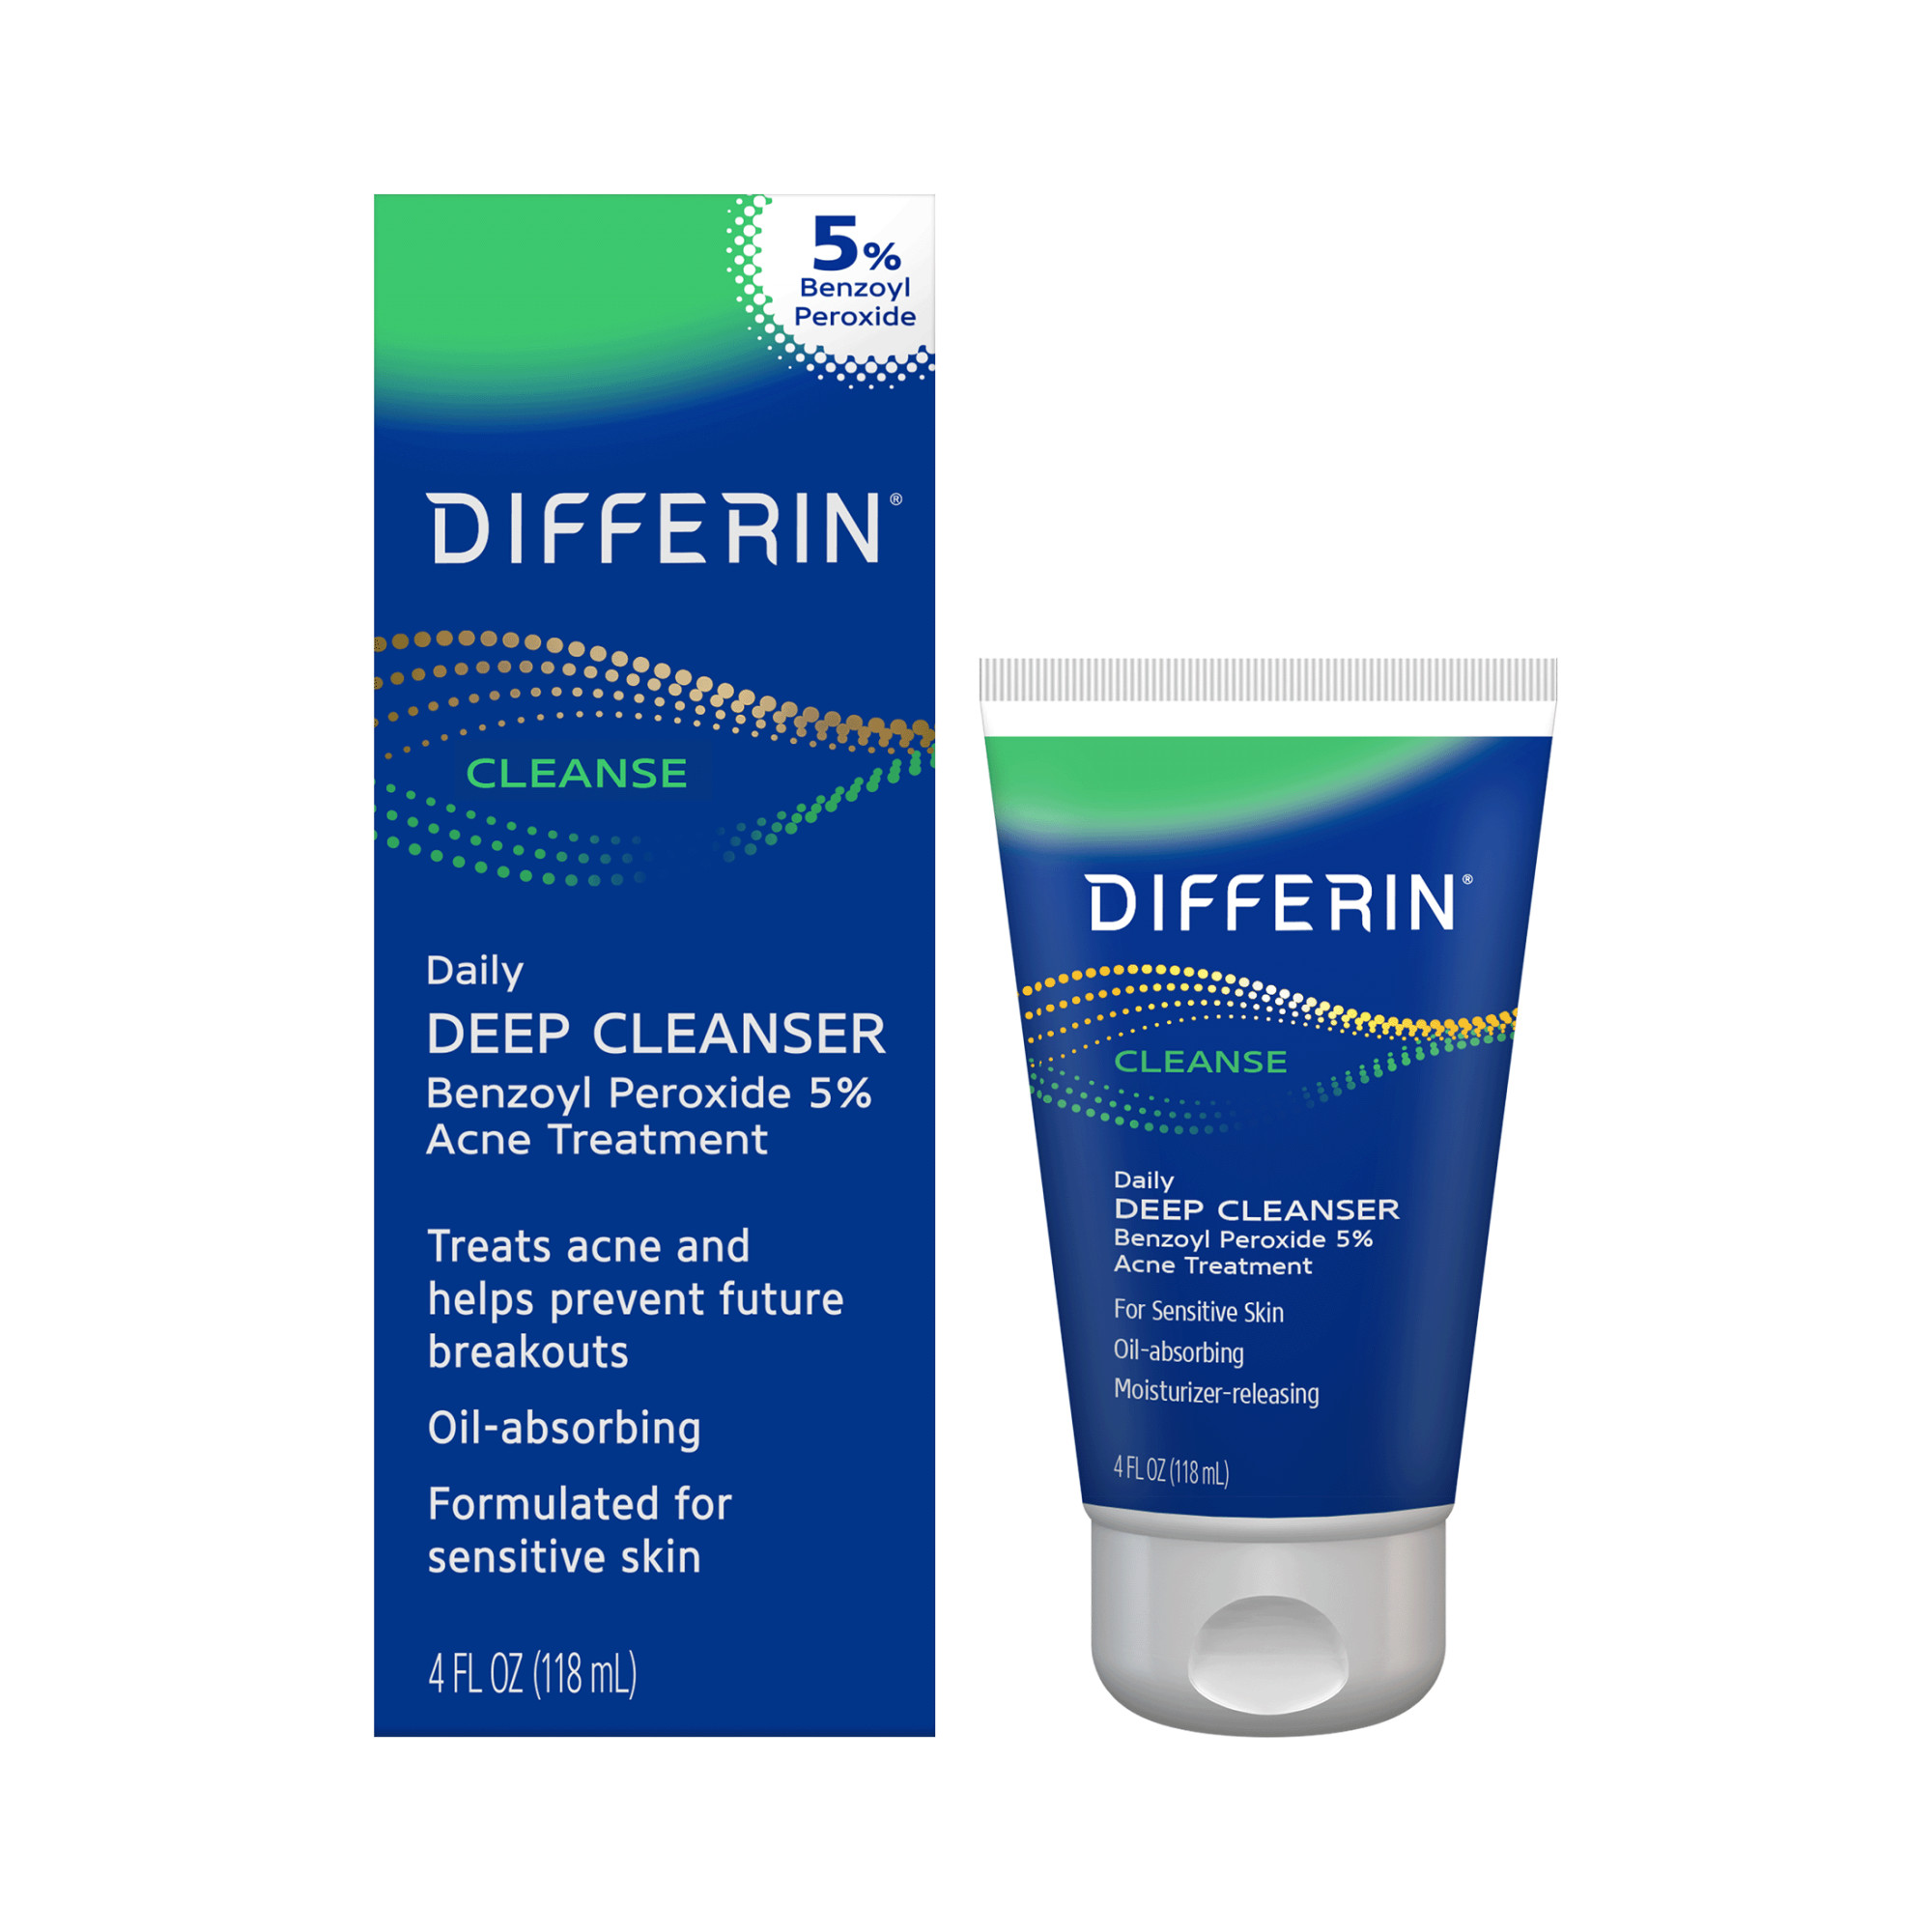 Differin Daily Deep Cleanser with 5% Benzoyl Peroxide, Face Wash for Acne Prone Skin, 4 oz - image 11 of 11